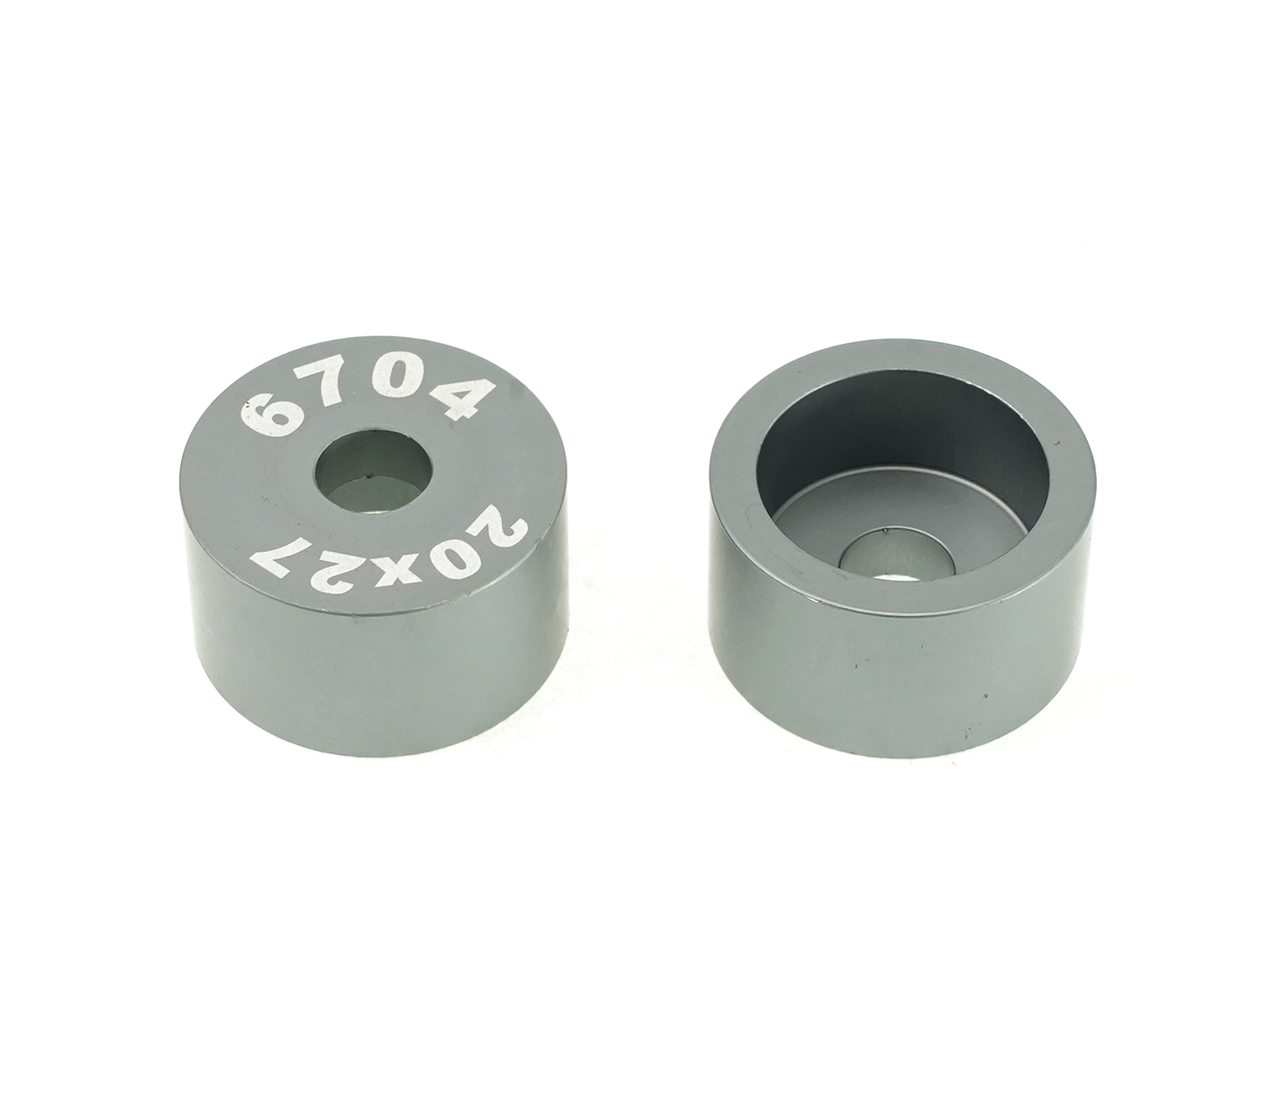 Enduro HT 6704 Outer - Outer Bearing Guide for Bearing Press (BRT-005 or BRT-050)  - single guide only